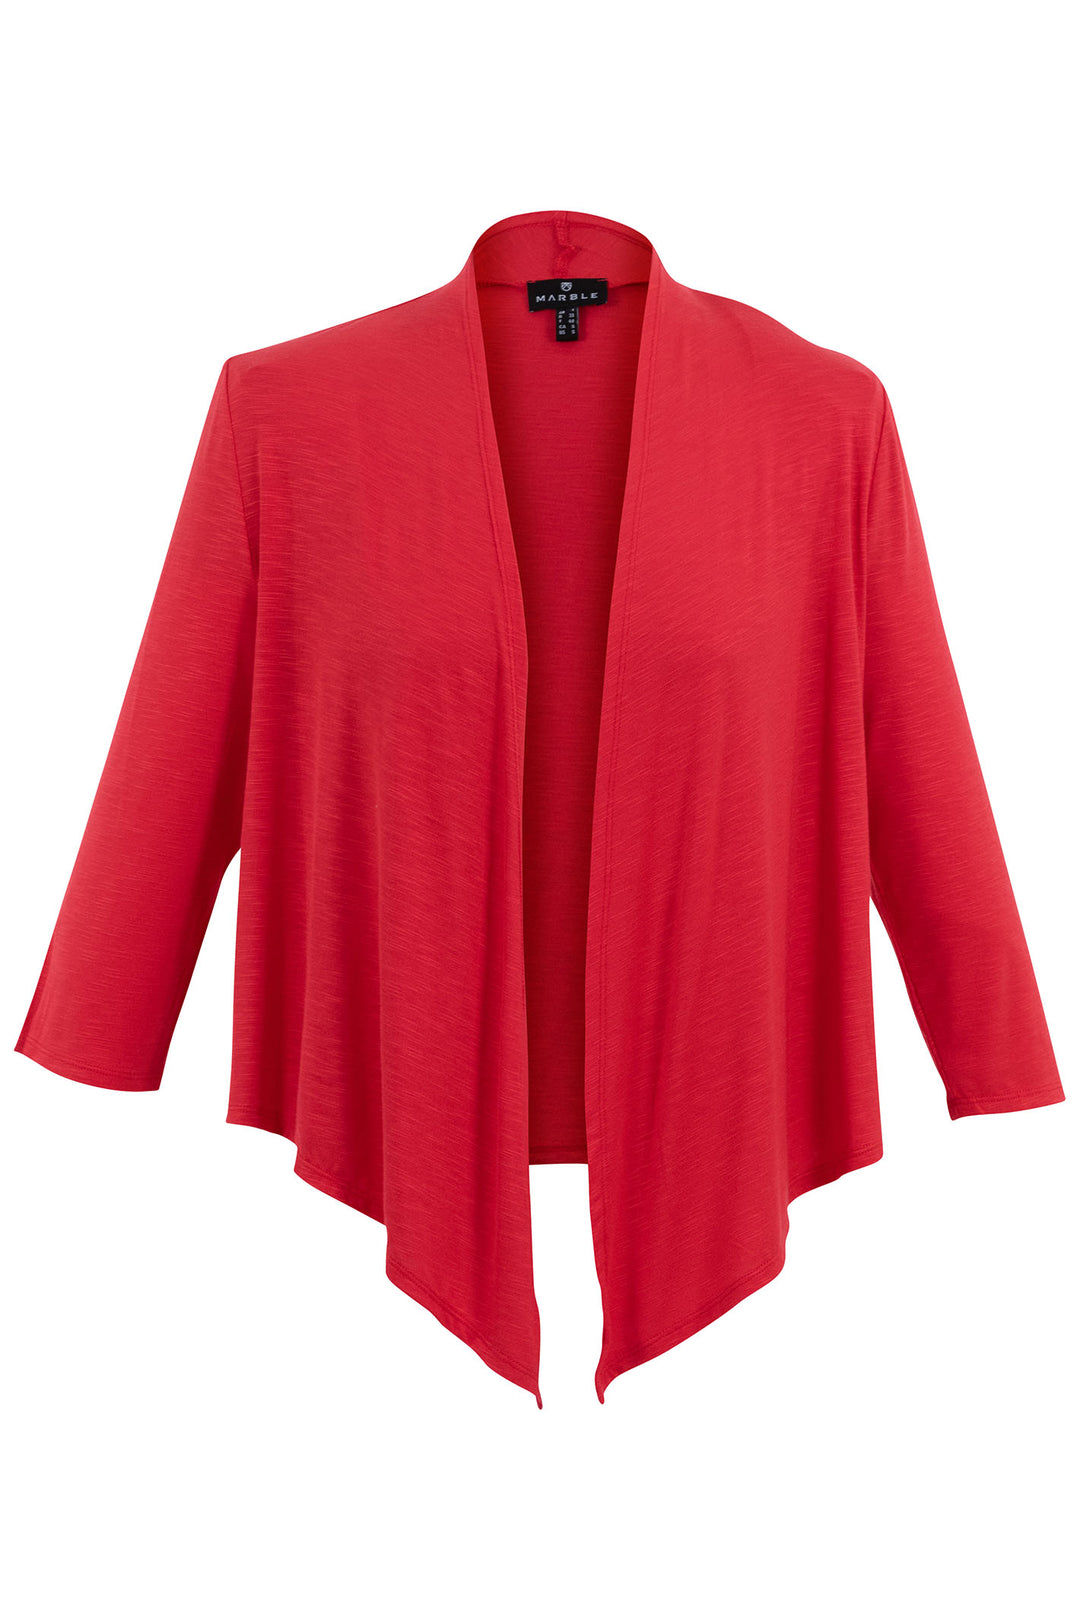 Marble Fashions 6541 109 Red Waterfall Jersey Cardigan Shrug - Experience Boutique